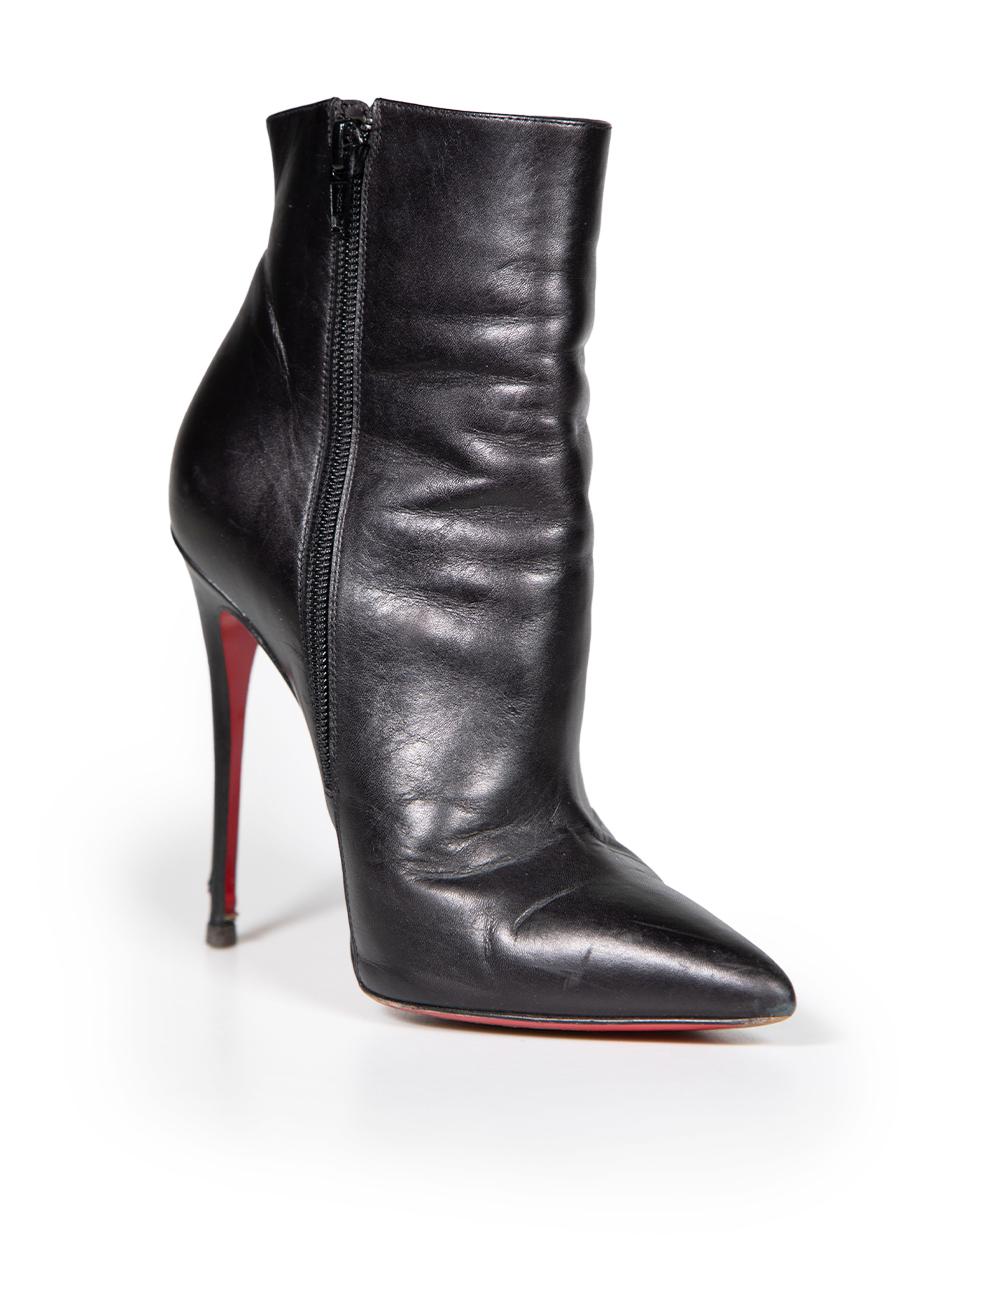 CONDITION is Good. Minimal wear to boots is evident. Minimal wear to the front is seen with general creasing to the leather with abrasion marks on the heels and pointed toe of both shoes on this used Christian Louboutin designer resale item.
 
 
 
